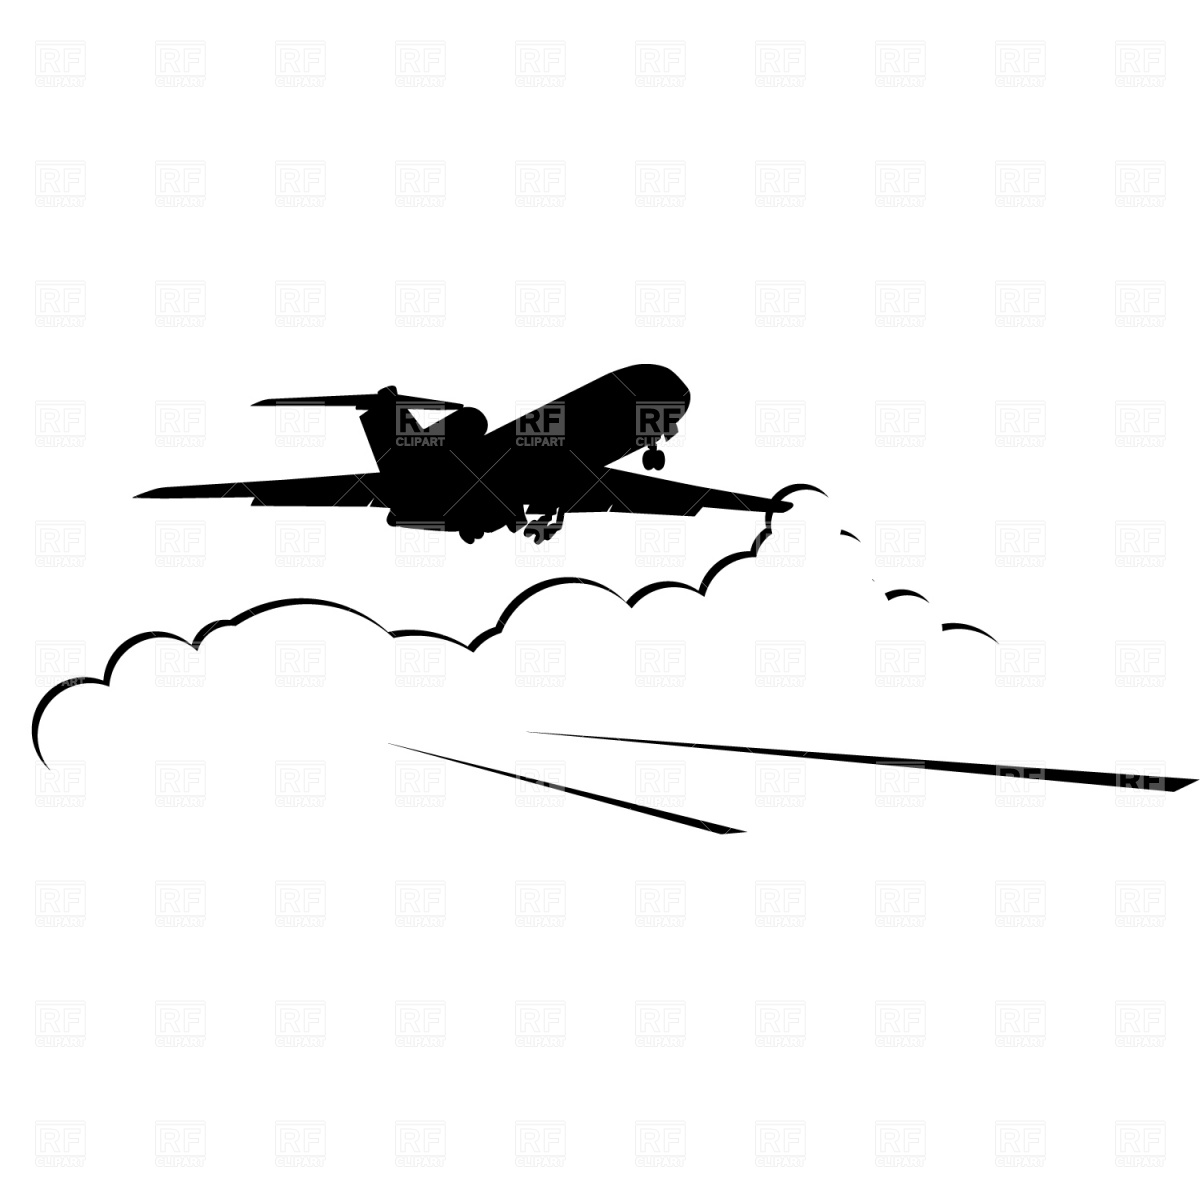 Clipart Catalog Silhouettes Outlines Jet Airplane Landing Download